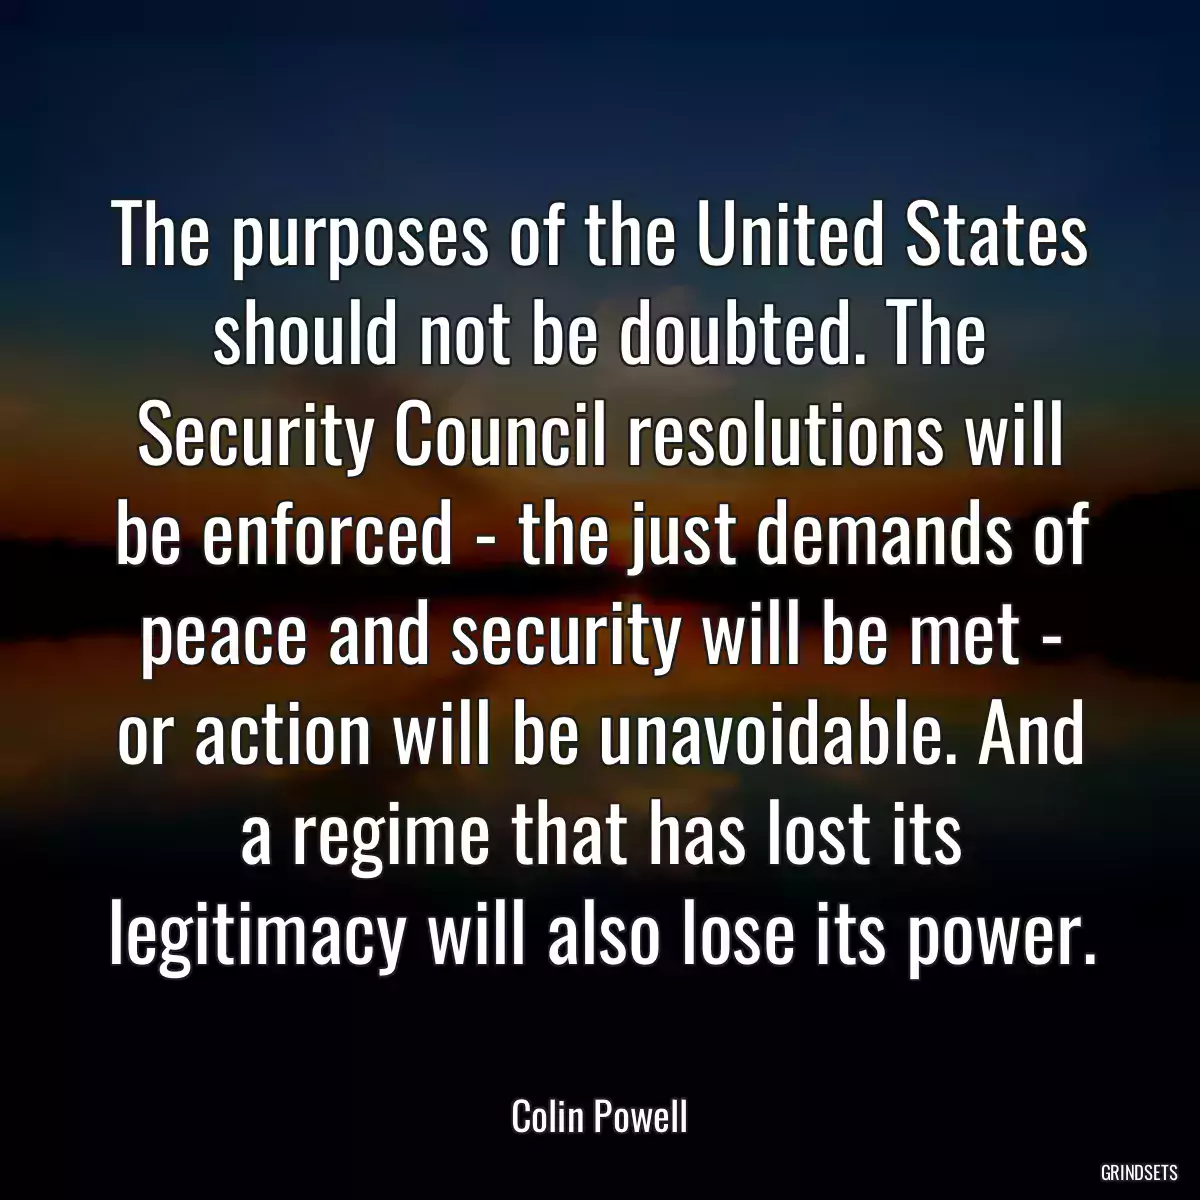 The purposes of the United States should not be doubted. The Security Council resolutions will be enforced - the just demands of peace and security will be met - or action will be unavoidable. And a regime that has lost its legitimacy will also lose its power.